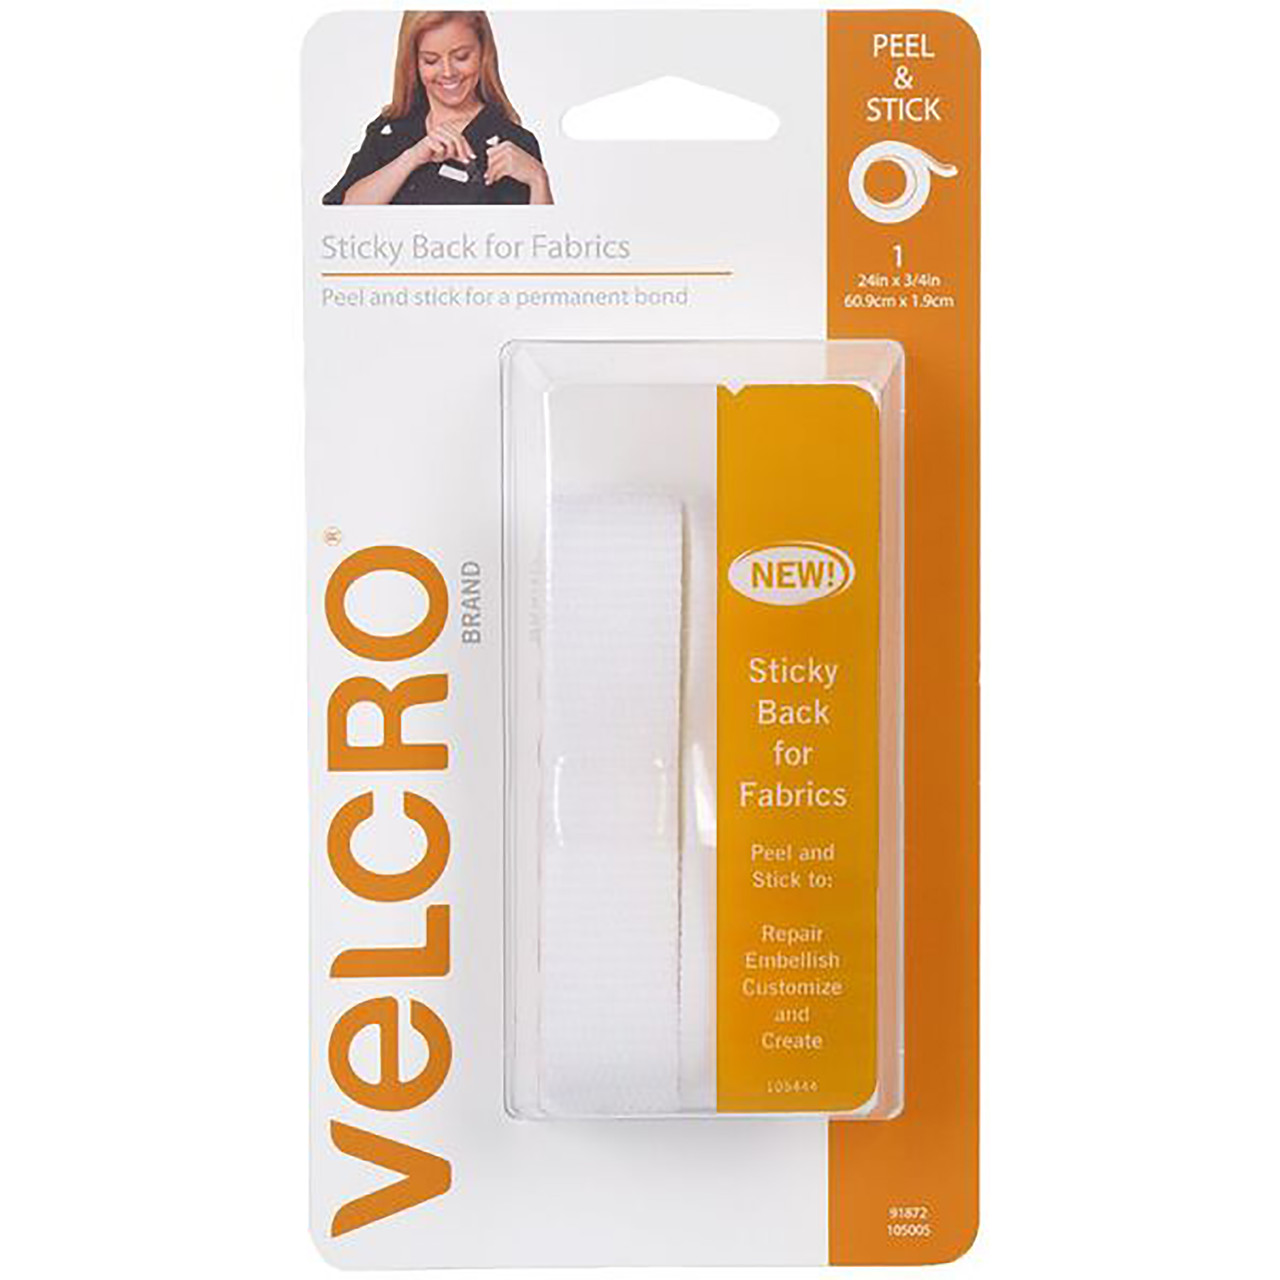 Velcro Brand Sleek and Thin Stick on 24in x 3/4in Tape, Black